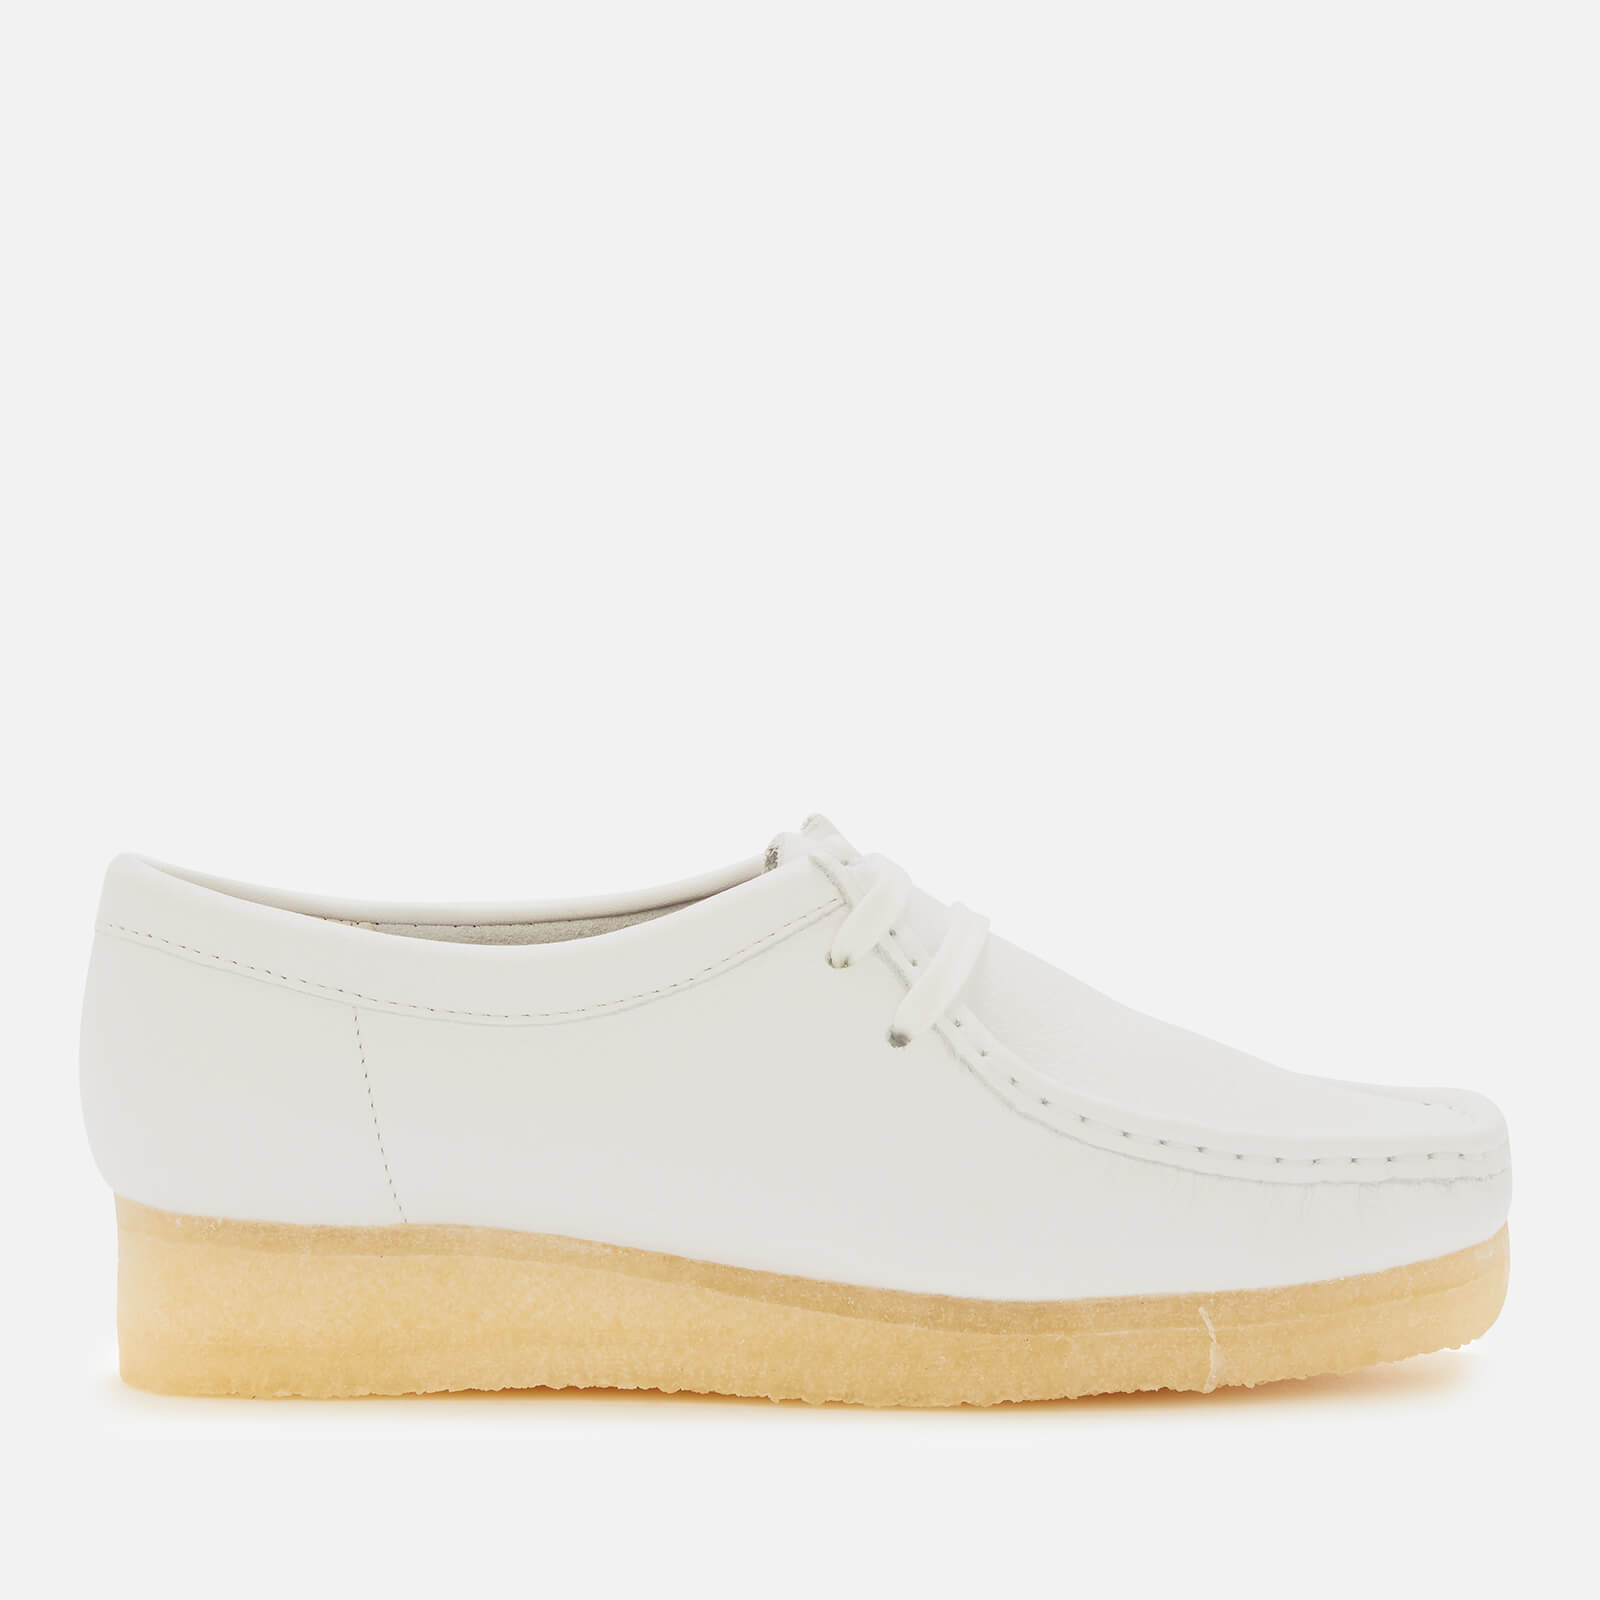 Clarks Original Women's Wallabee Leather Shoes - White - UK 8